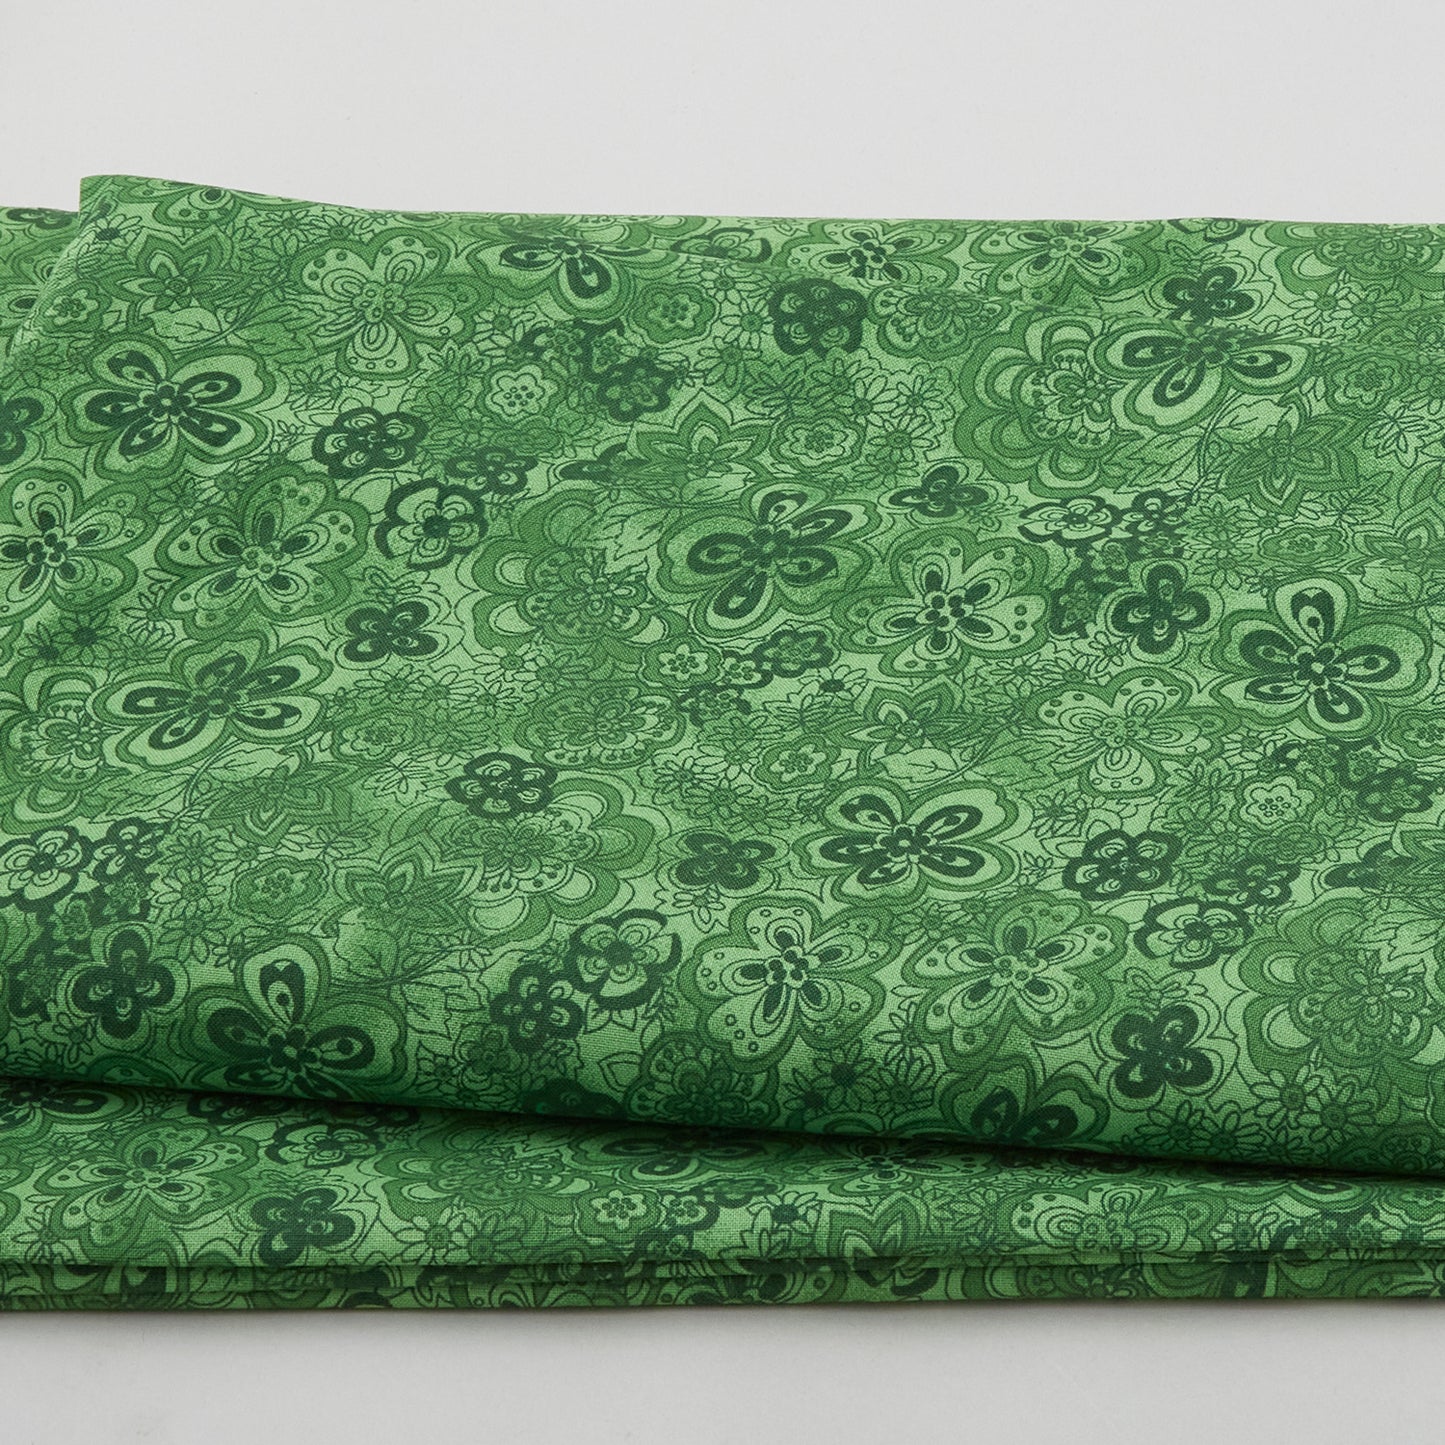 Isadora - Tonal Floral Lime 108" Wide 3 Yard Cut Primary Image